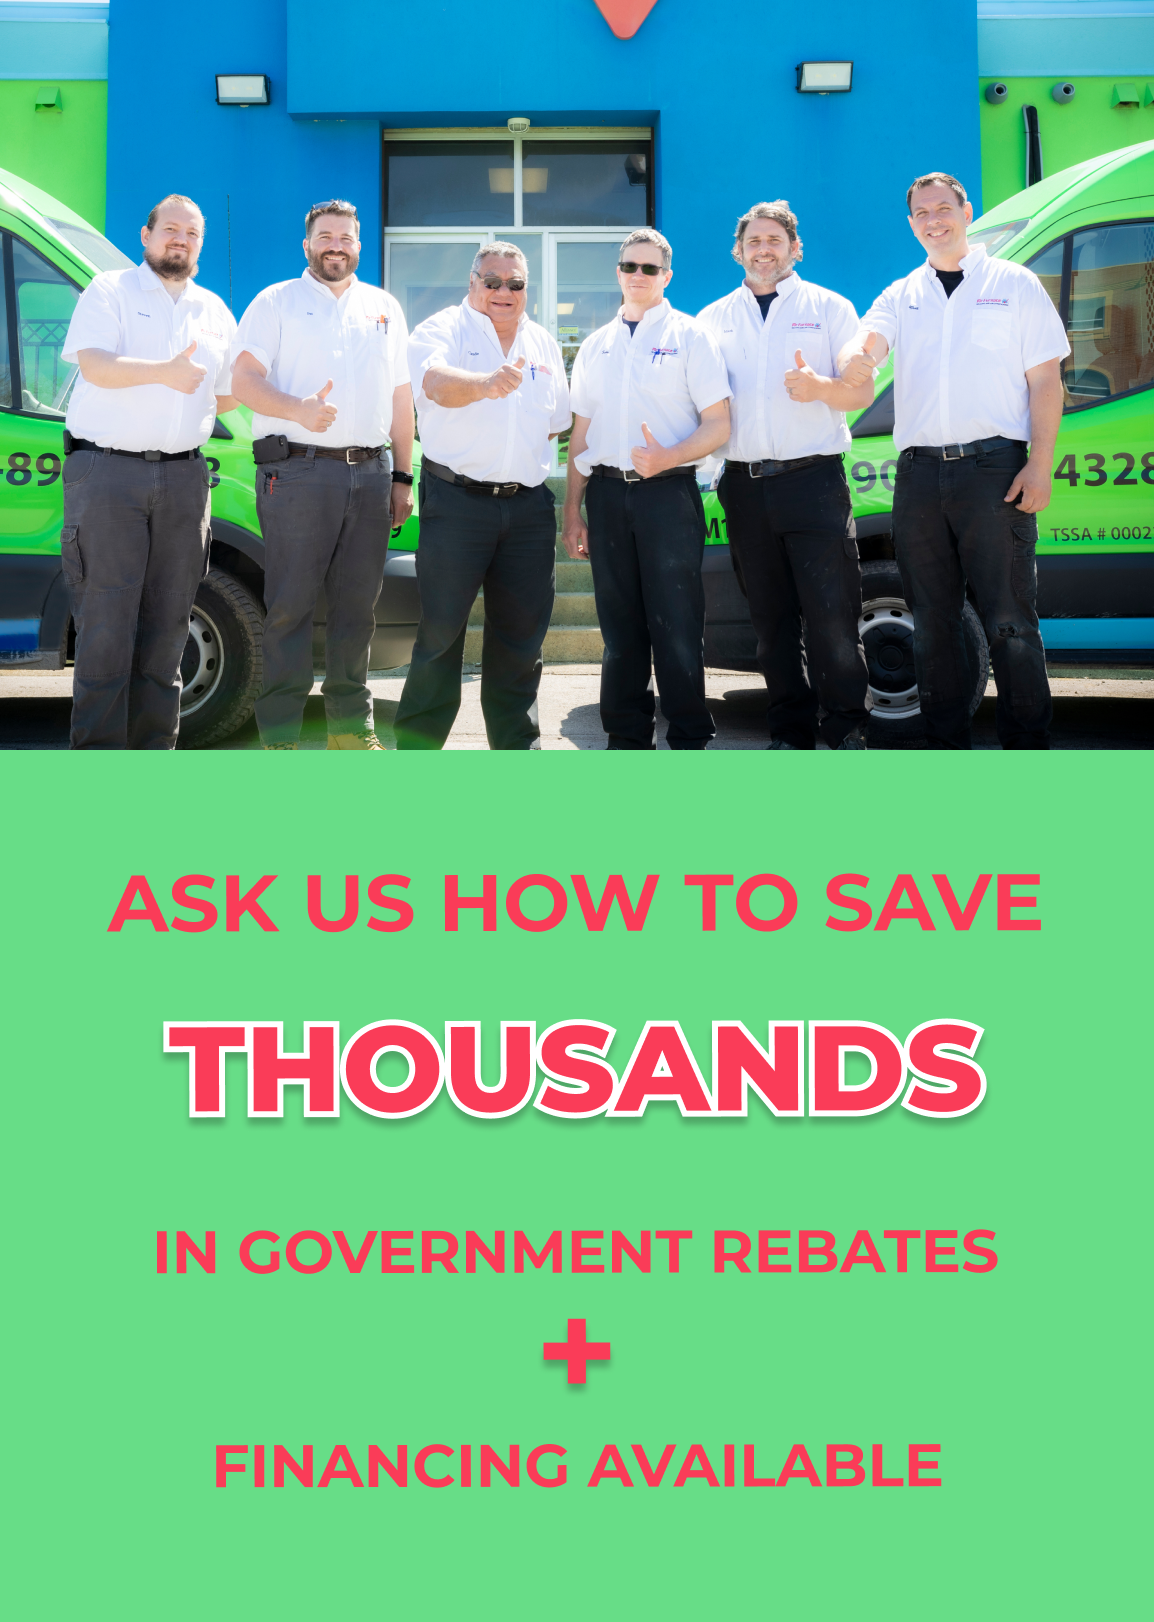 Heat pump installation Fonthill, save thousands in government rebates